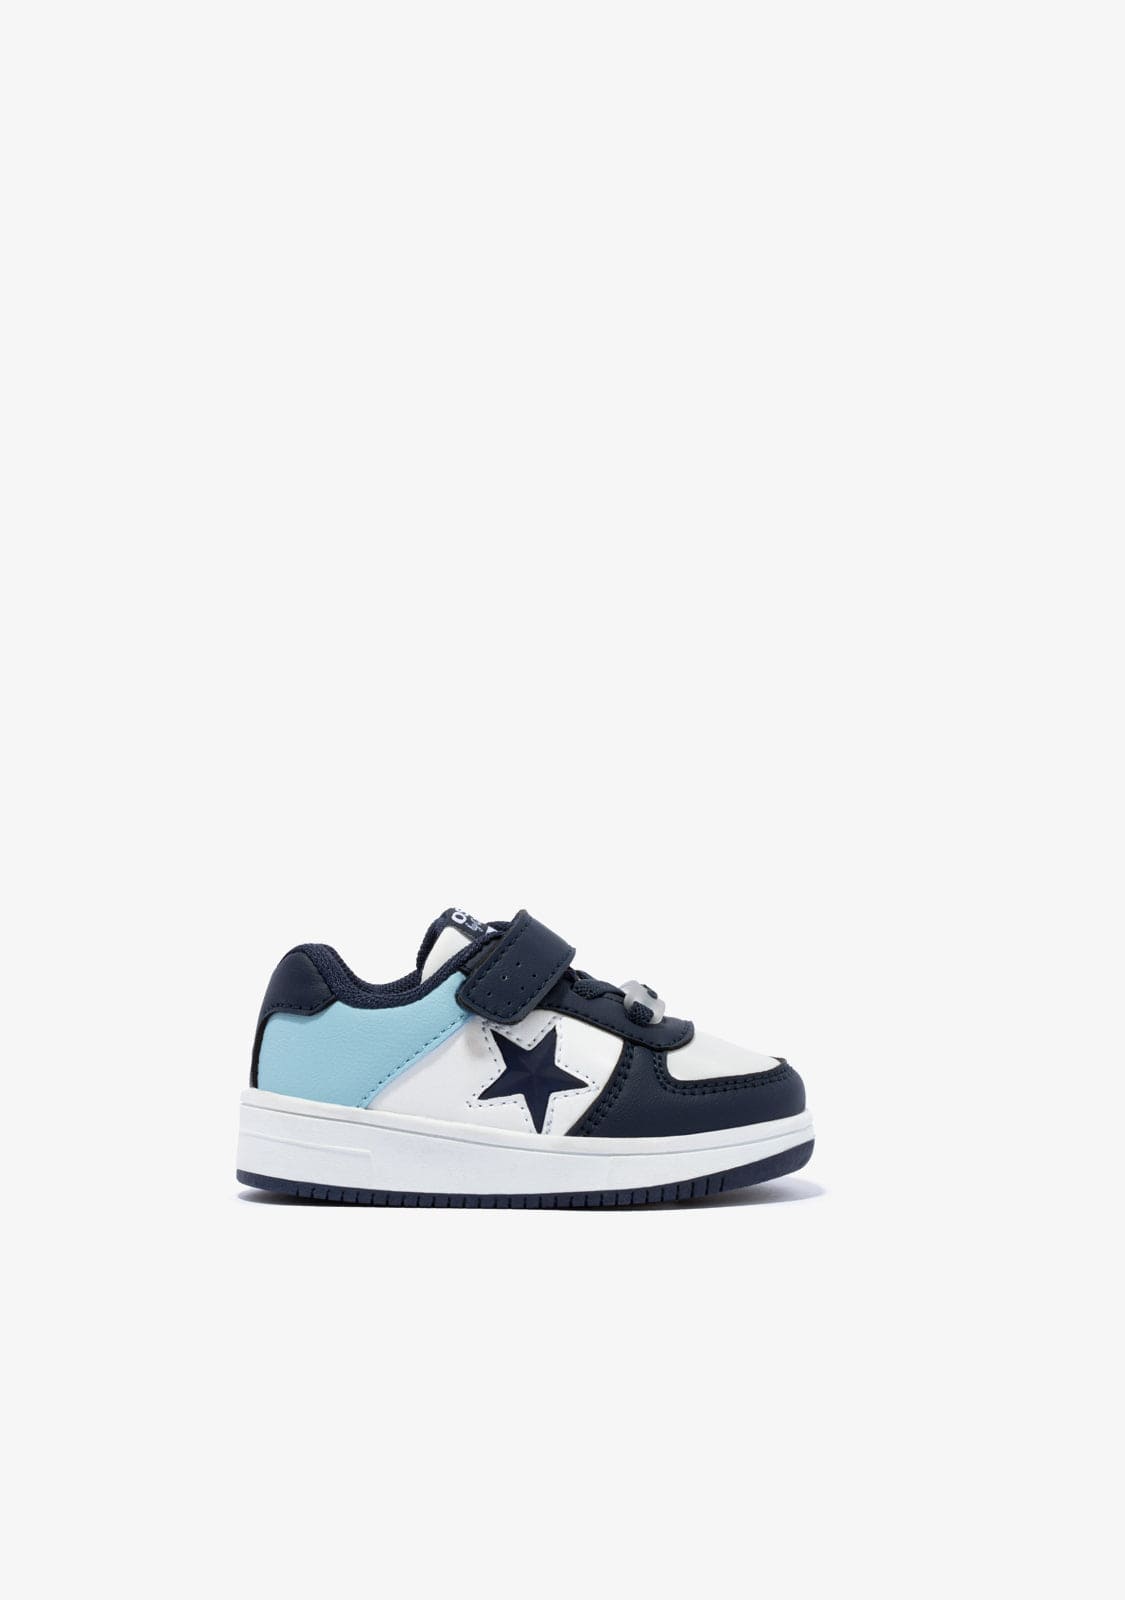 OSITO Shoes Baby's White Blue With Lights Star Sneakers